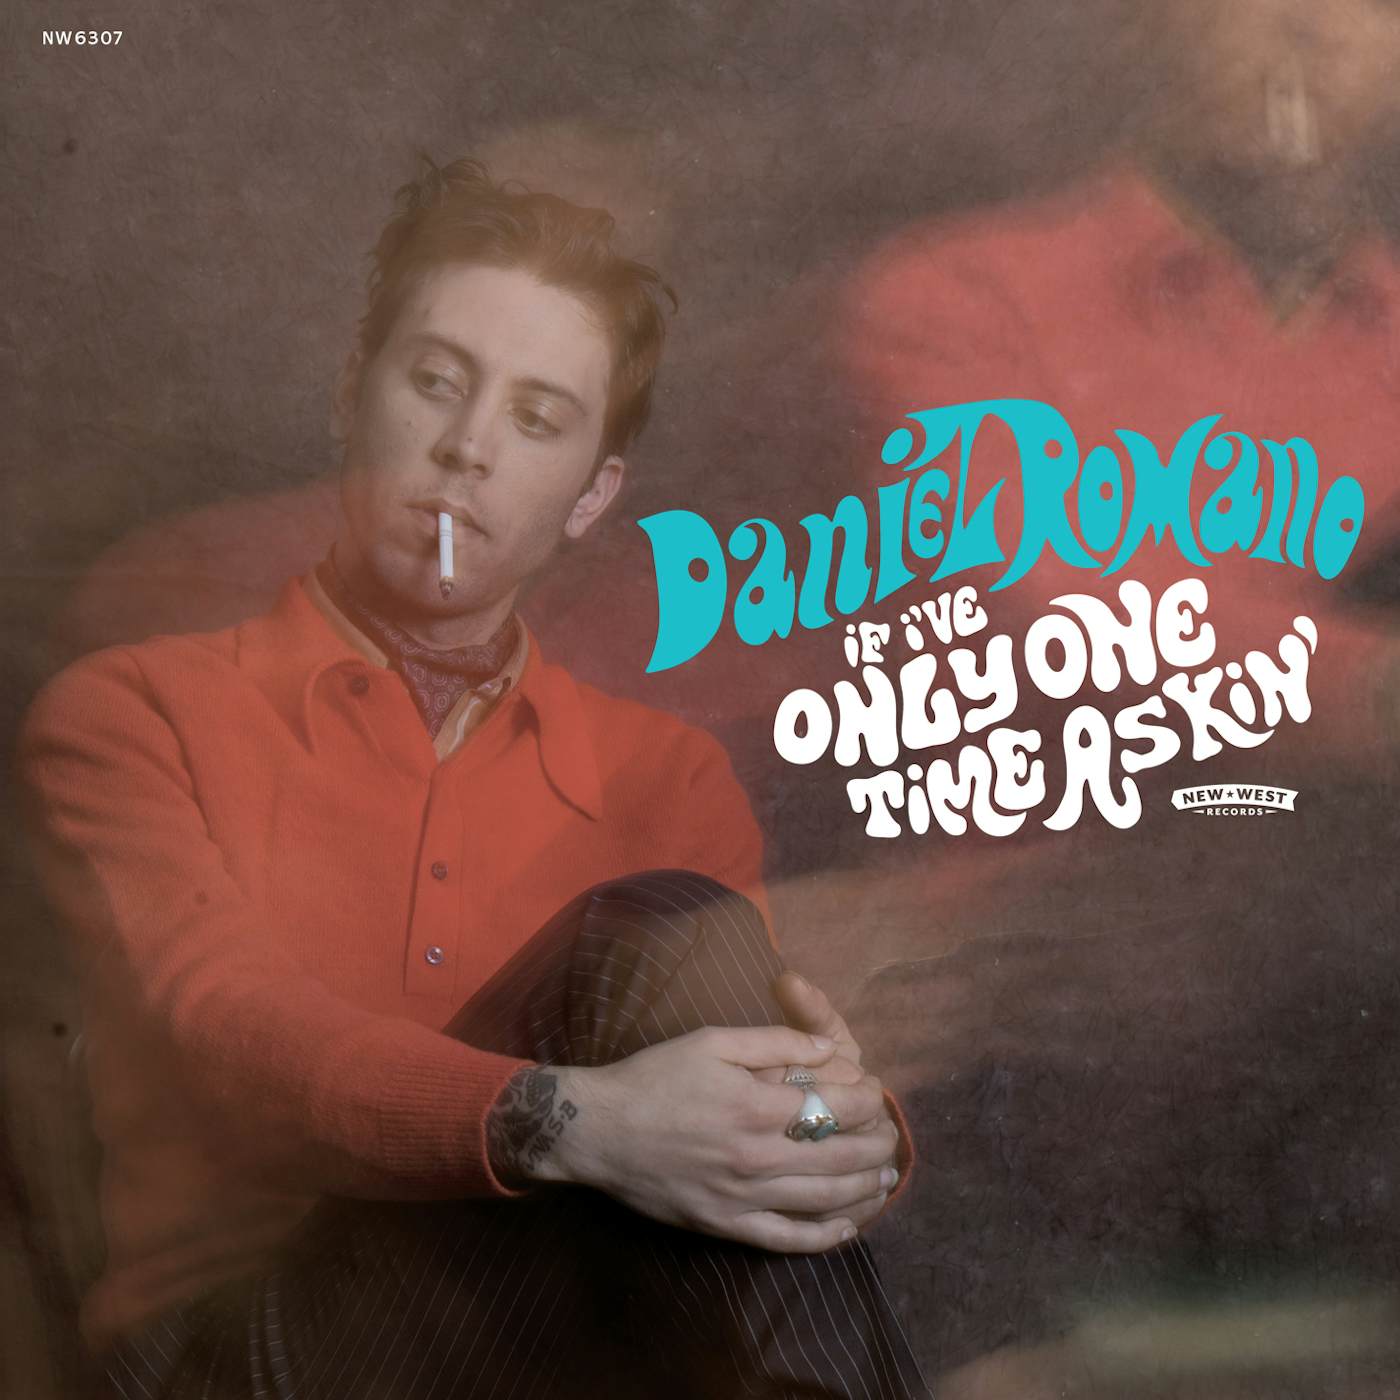 Daniel Romano IF I'VE ONLY ONE TIME ASKIN Vinyl Record